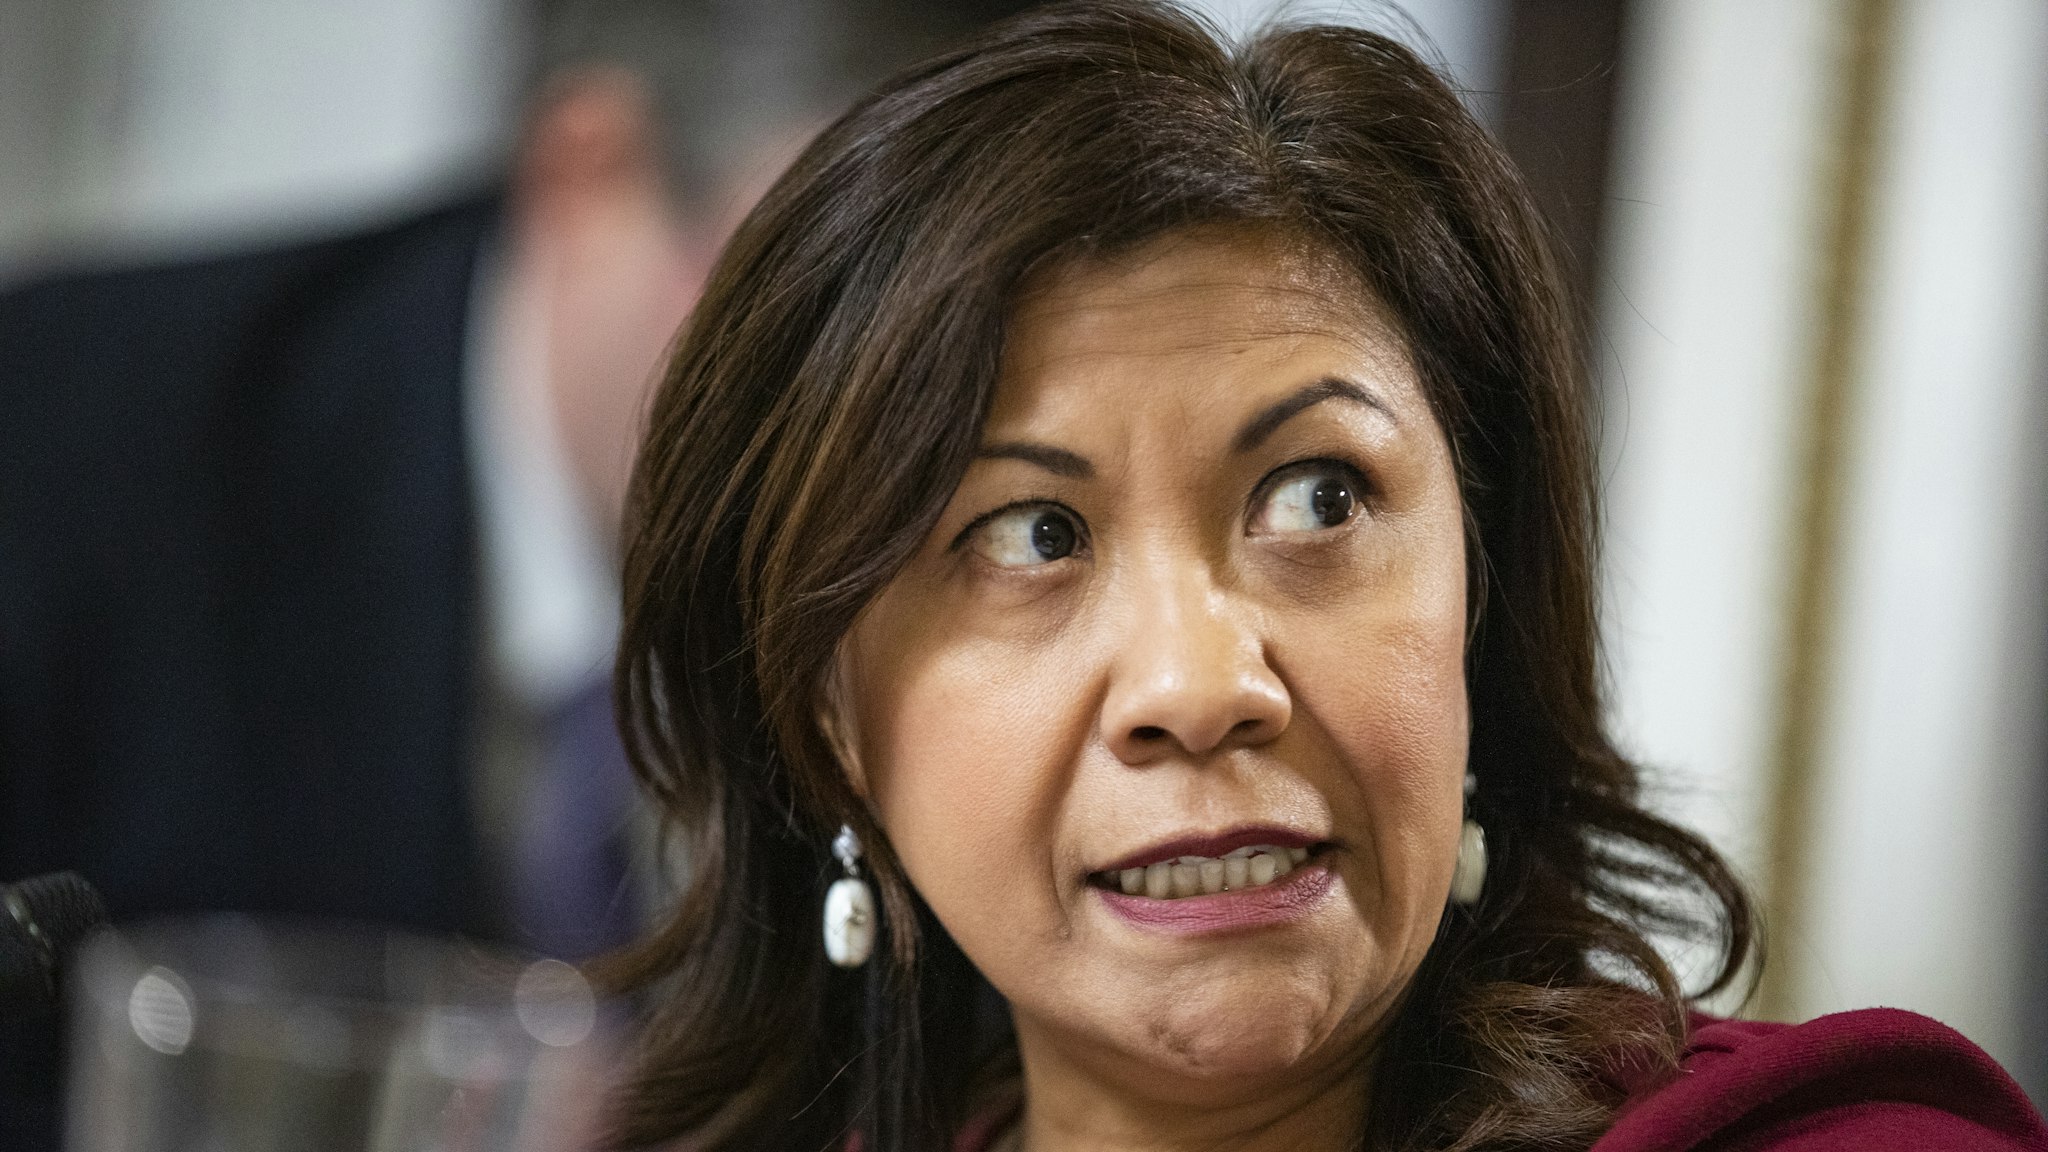 U.S. Rep. Norma J. Torres (D-CA) argues against an amendment to House Resolution 660 during a full House Rules Committee markup of the resolution at the U.S. Capitol on October 30, 2019 in Washington, DC. H.R. 660 directs certain House committees to continue their ongoing investigations as part of the continued House of Representatives impeachment inquiry of President Donald Trump and his conduct in office